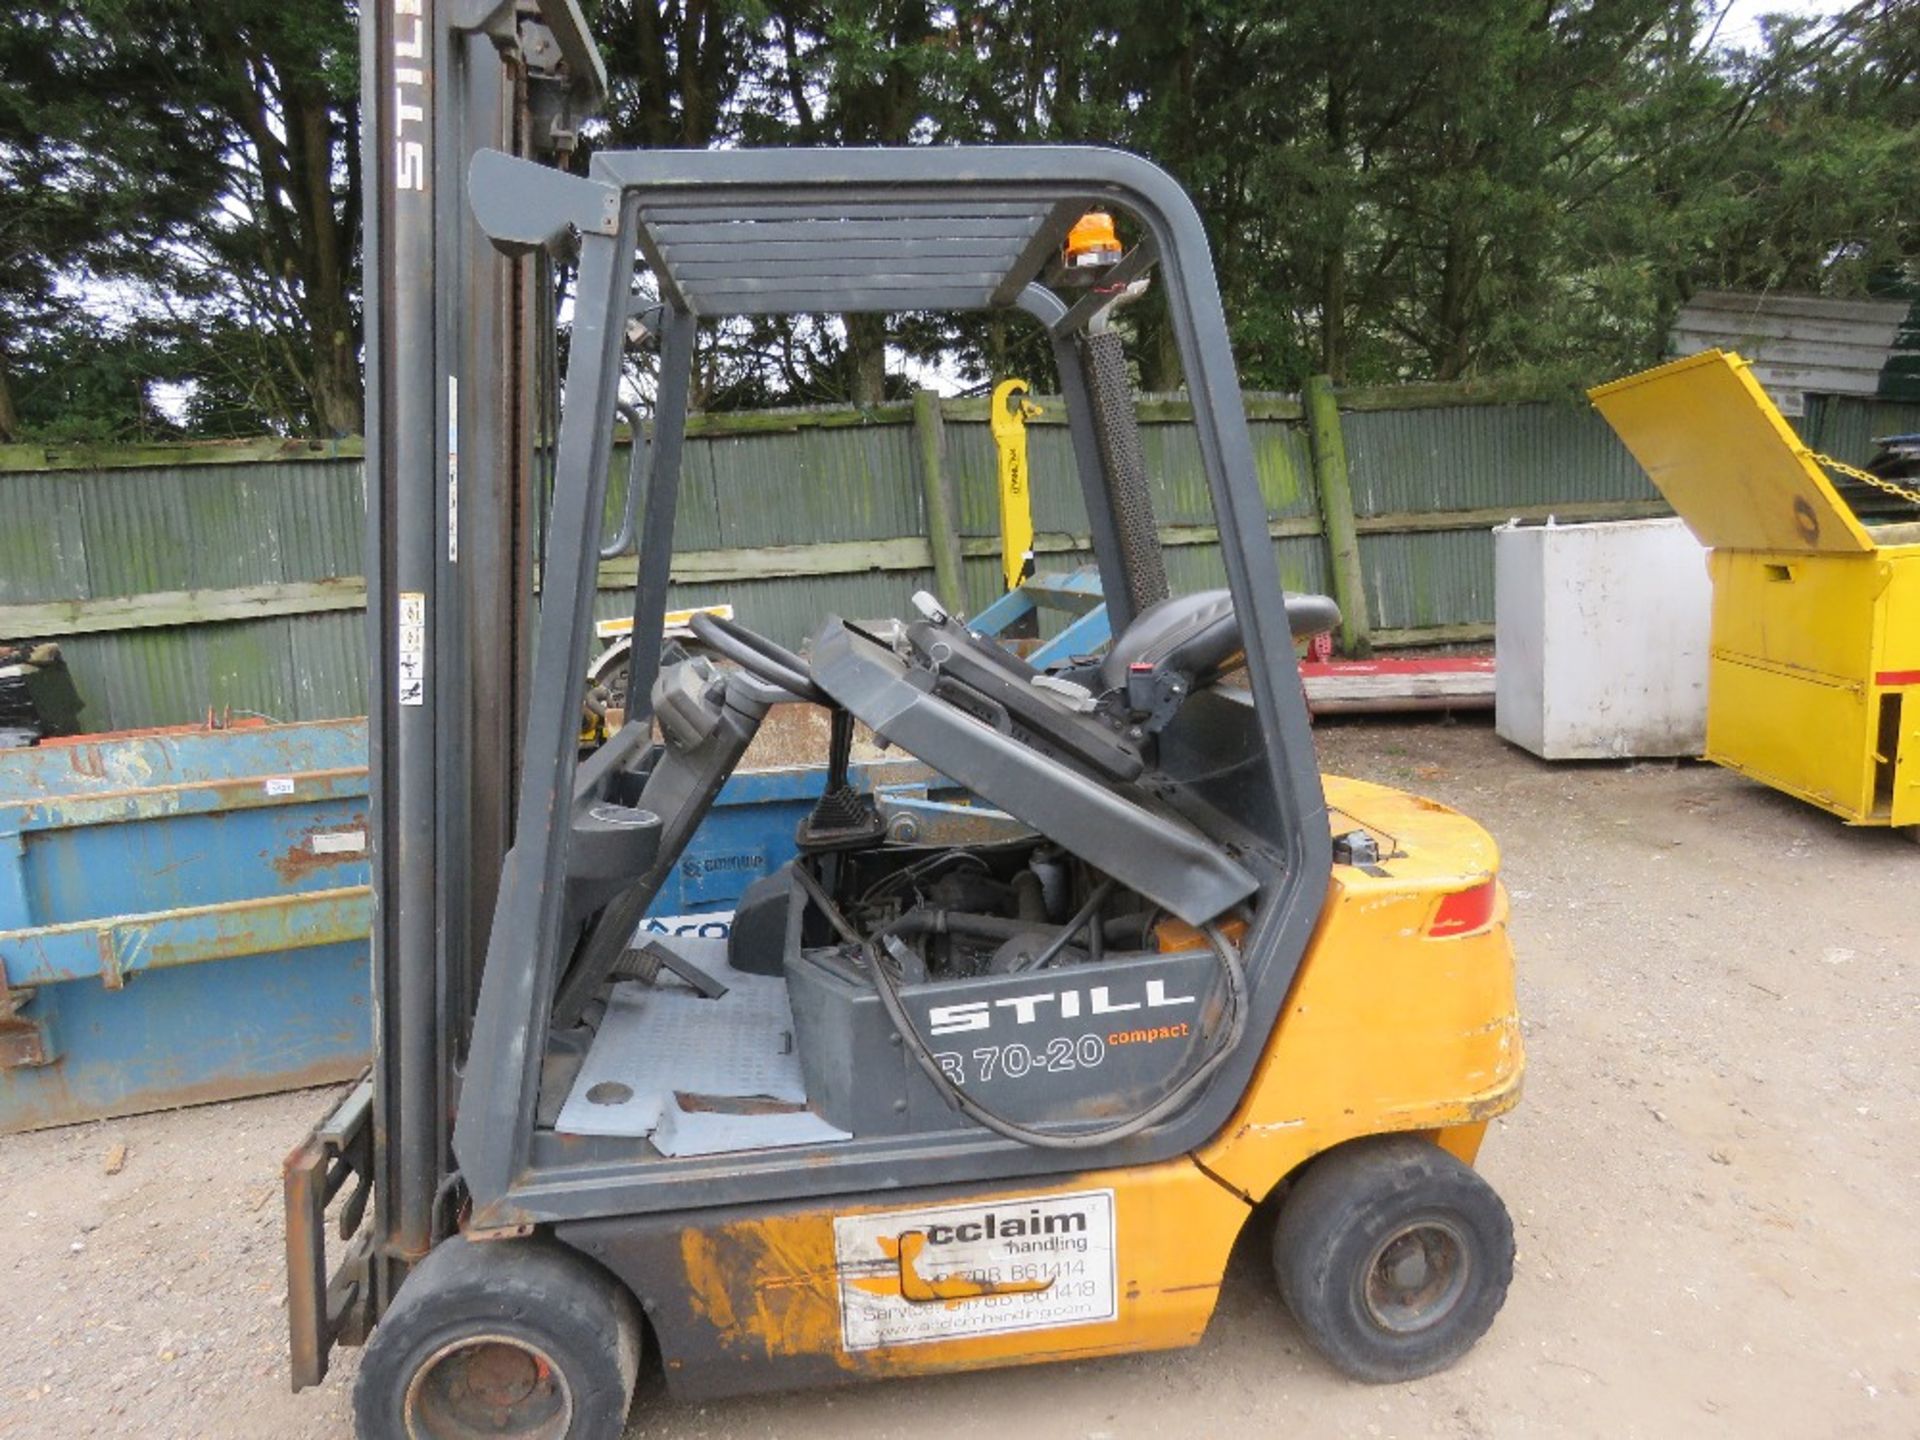 STILL R70-20 COMPACT DIESEL ENGINED FORKLIFT, SN:076001217. WEN TESTED WAS SEEN TO START, RUN AND LI - Image 3 of 8